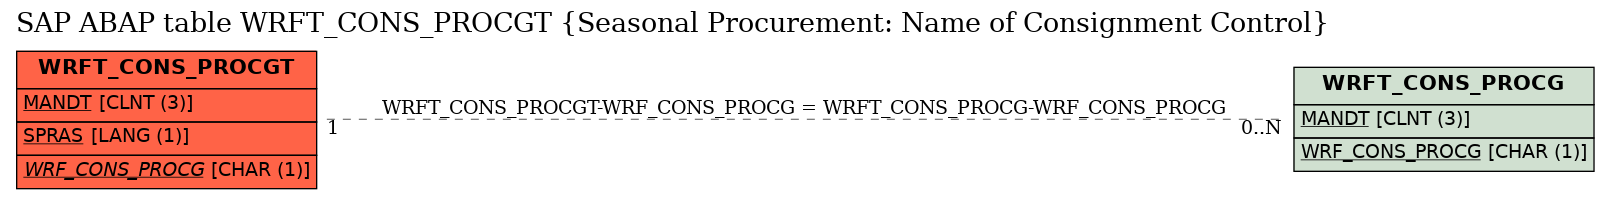 E-R Diagram for table WRFT_CONS_PROCGT (Seasonal Procurement: Name of Consignment Control)